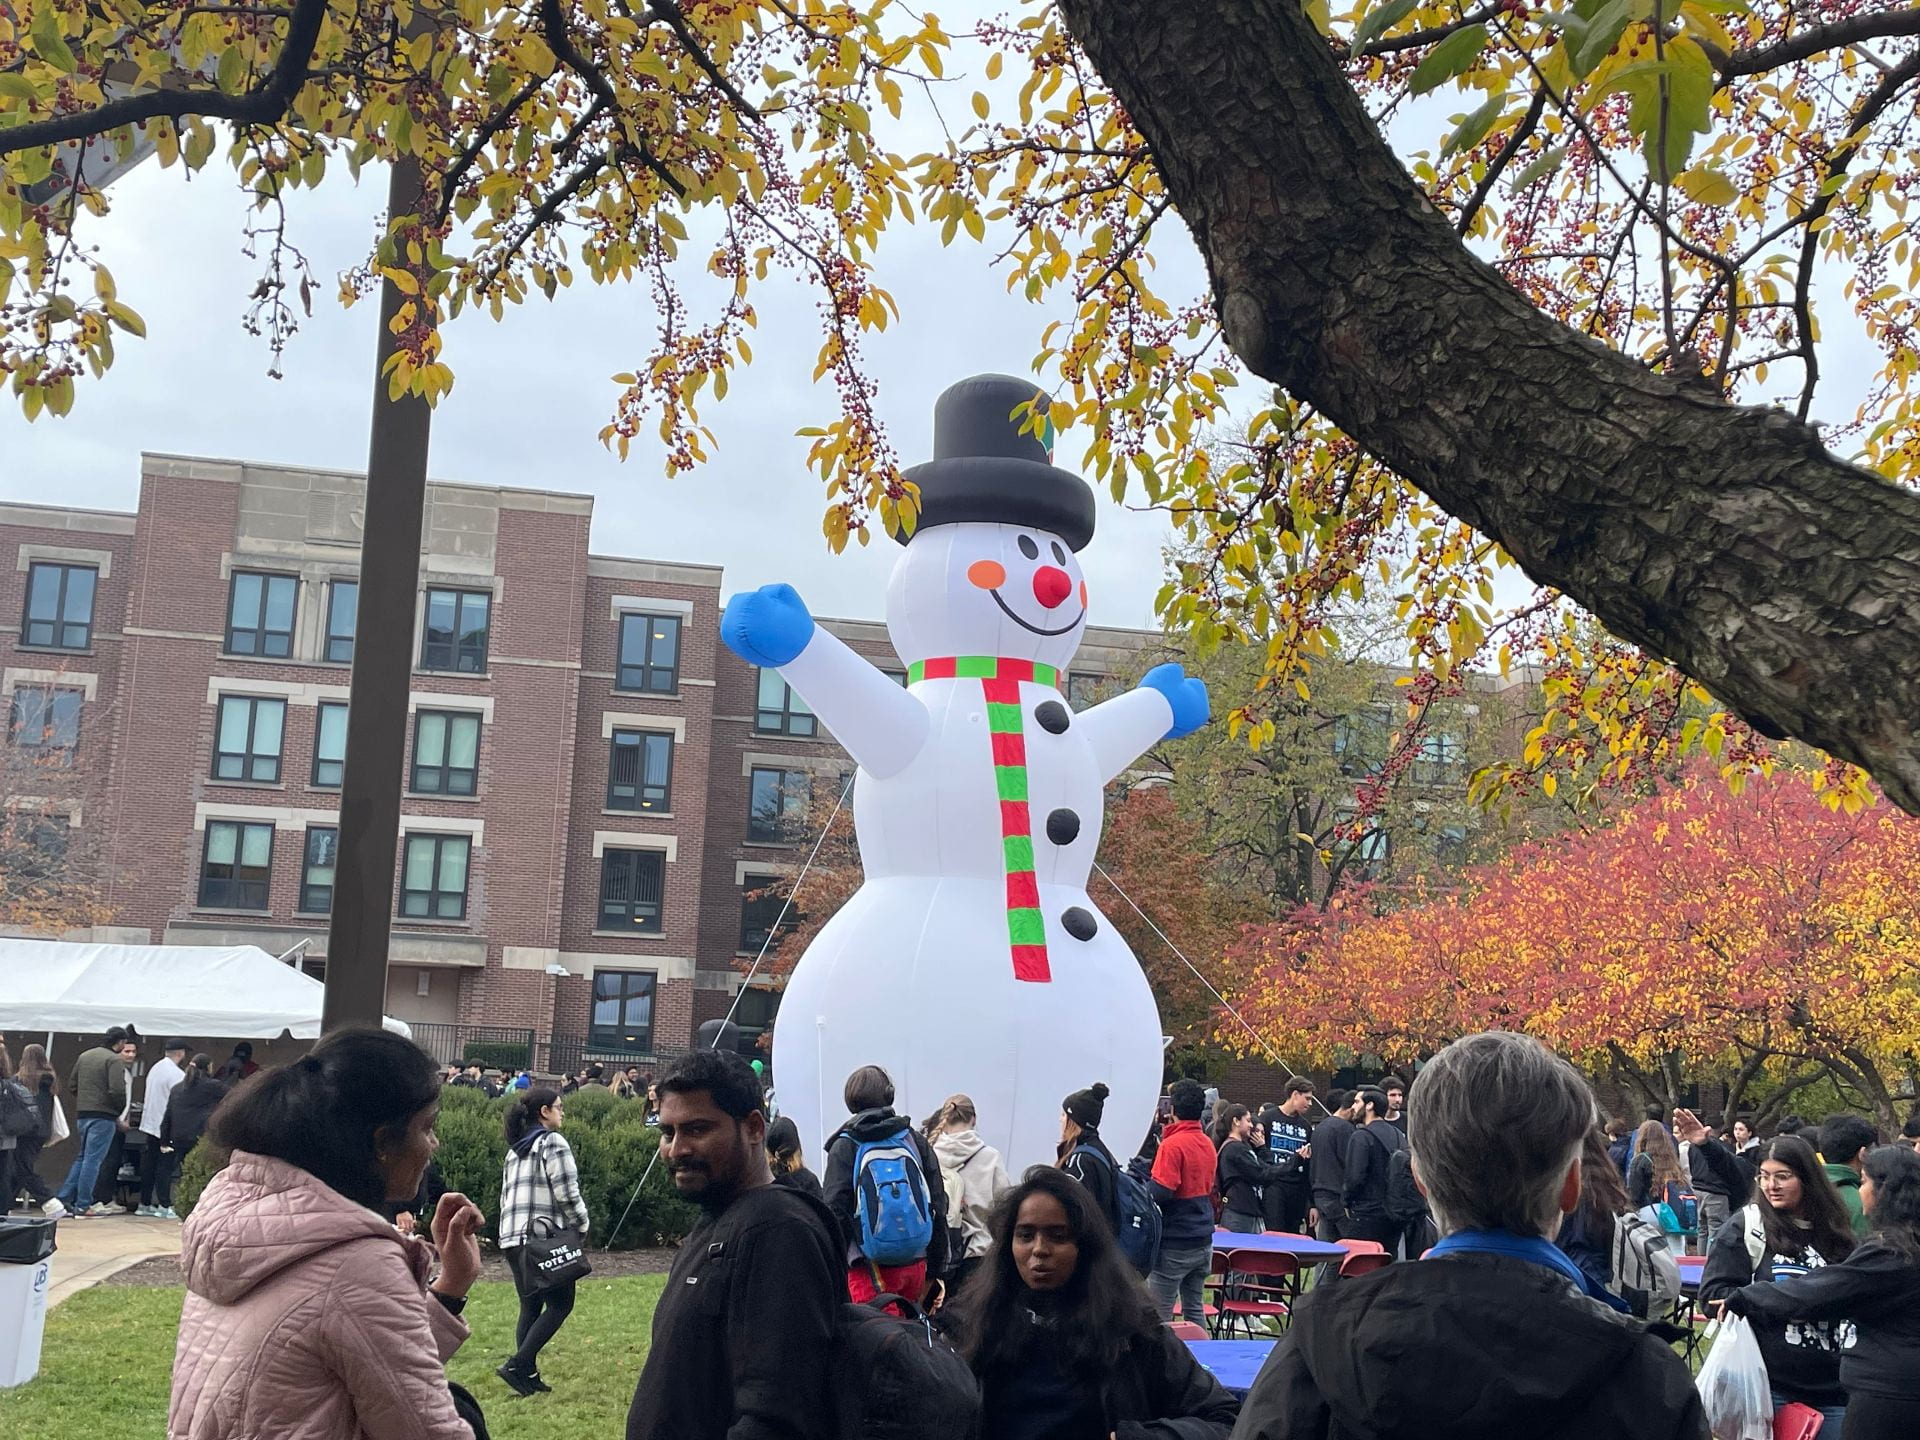  A picture of a large inflatable snowman at the DePaul University Ugly Sweater Party.<br />
